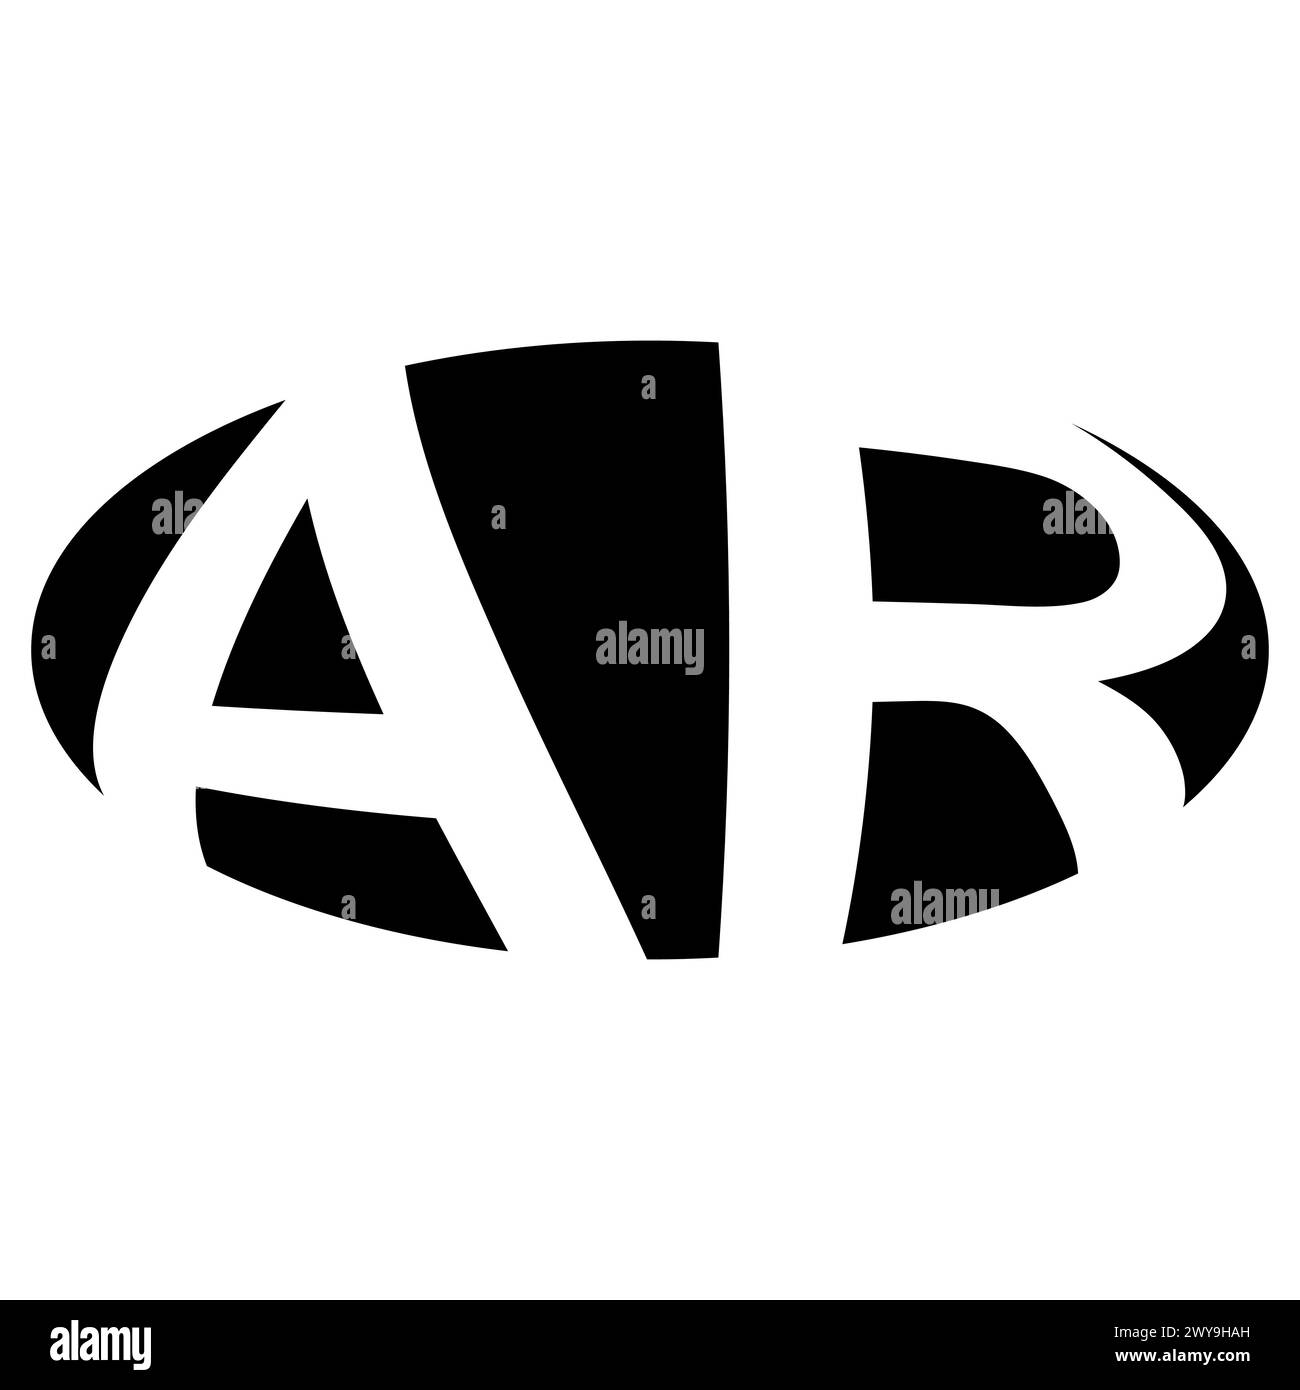 Oval logo double letter A, R two letters ar ra Stock Vector